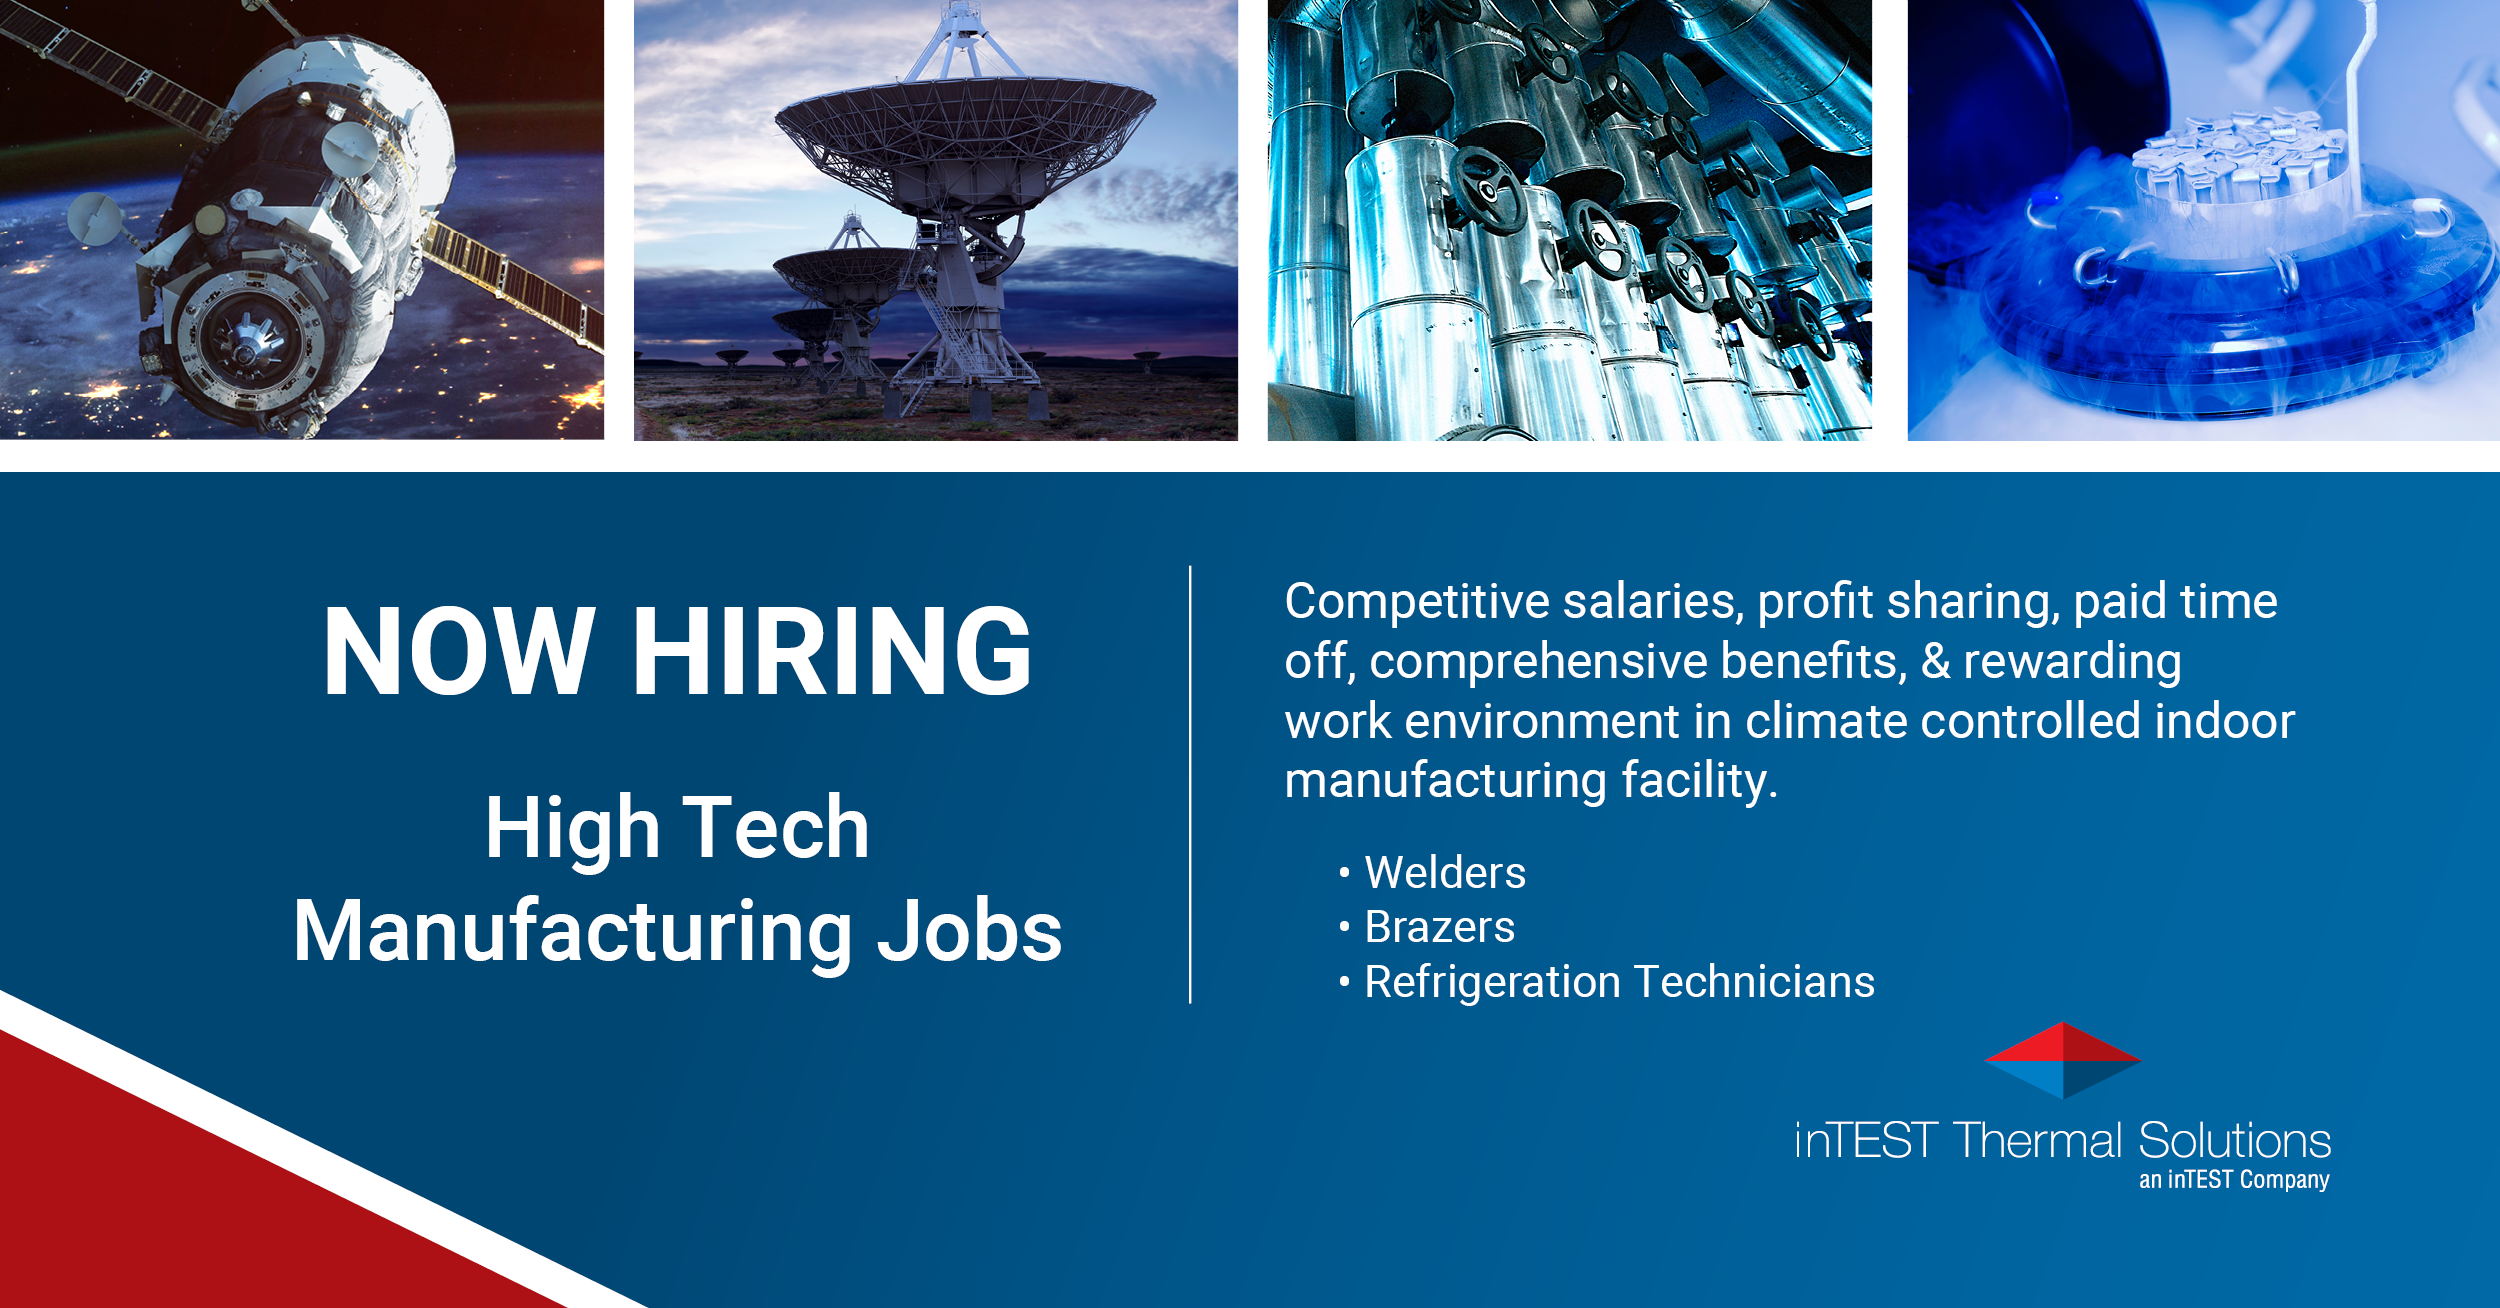 inTEST Thermal Solutions is Hiring!